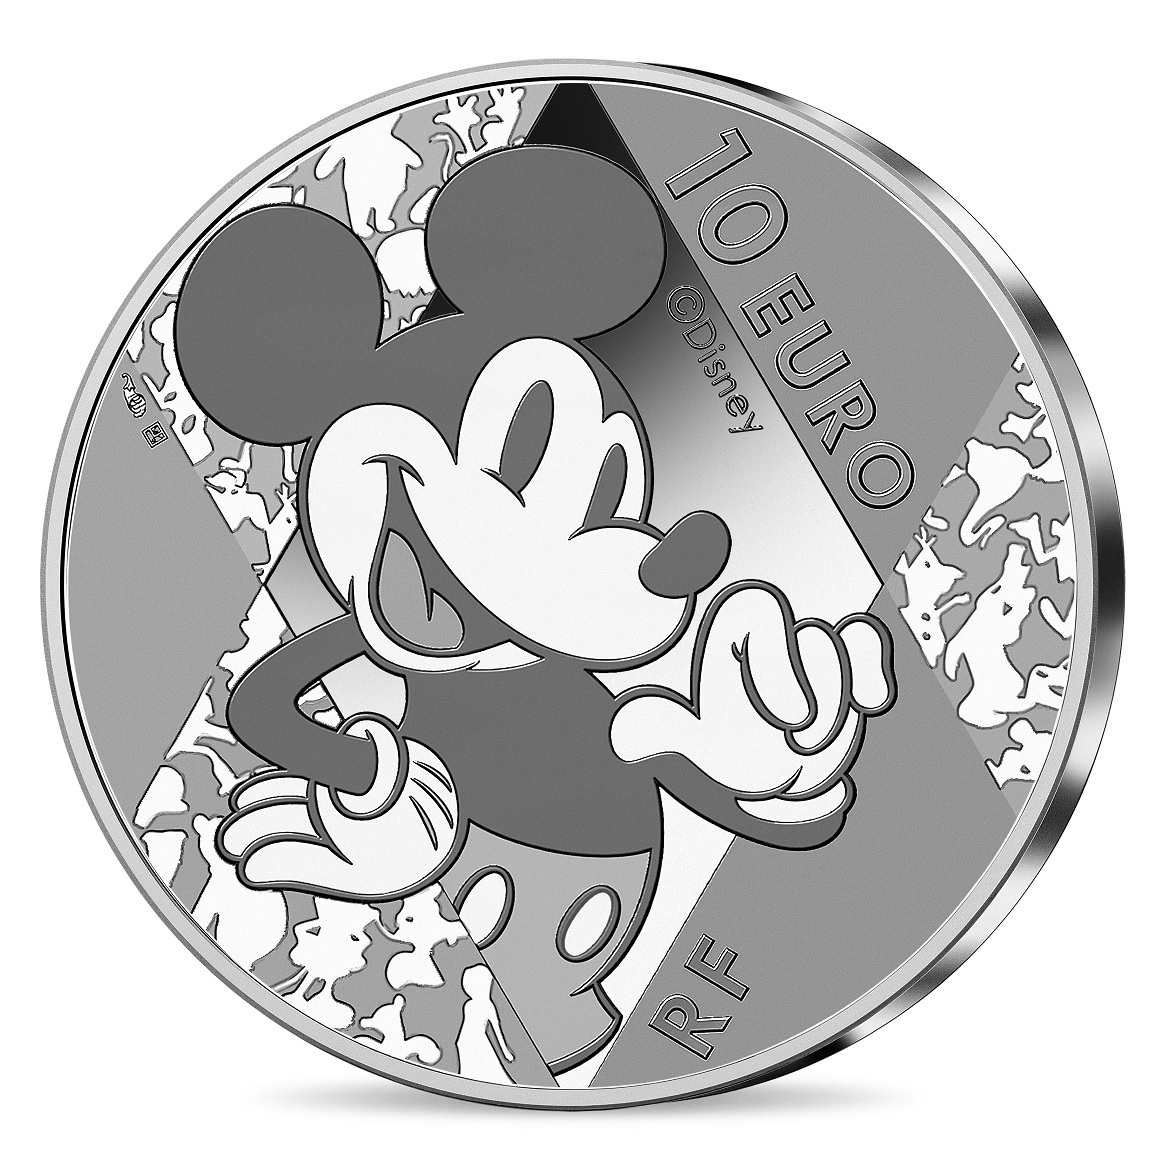 (EUR07.Proof.2023.10041378010000) 10 euro France 2023 Proof silver - Disney Studios 100 Years (Donald Duck) Reverse (zoom)